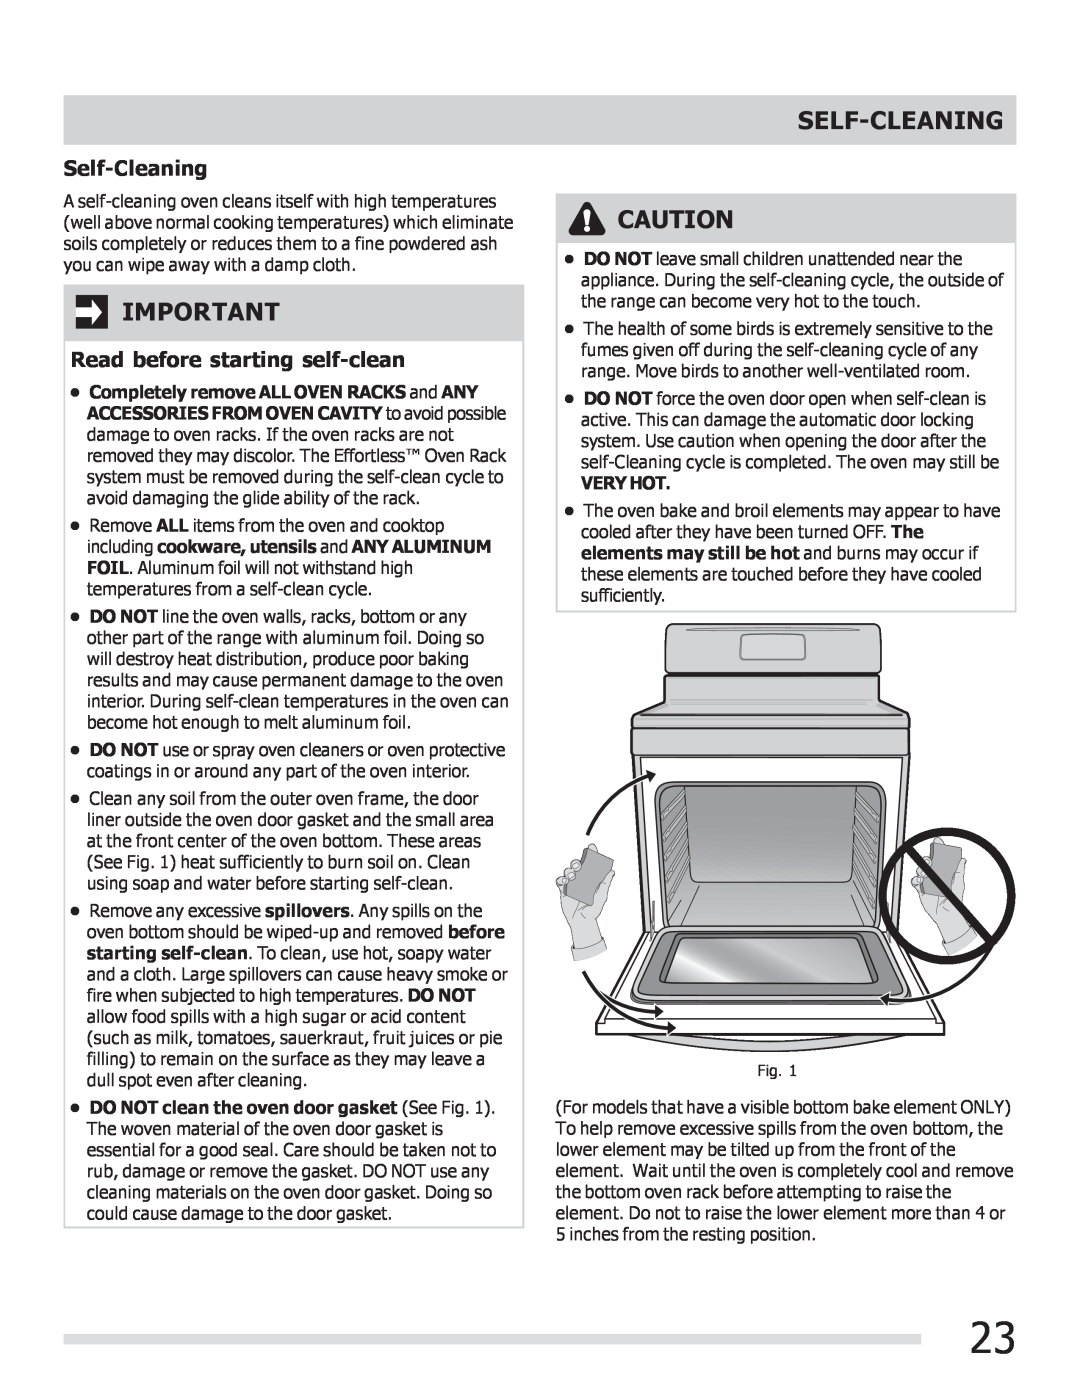 Frigidaire FGEF3042KF manual Self-Cleaning, Read before starting self-clean 